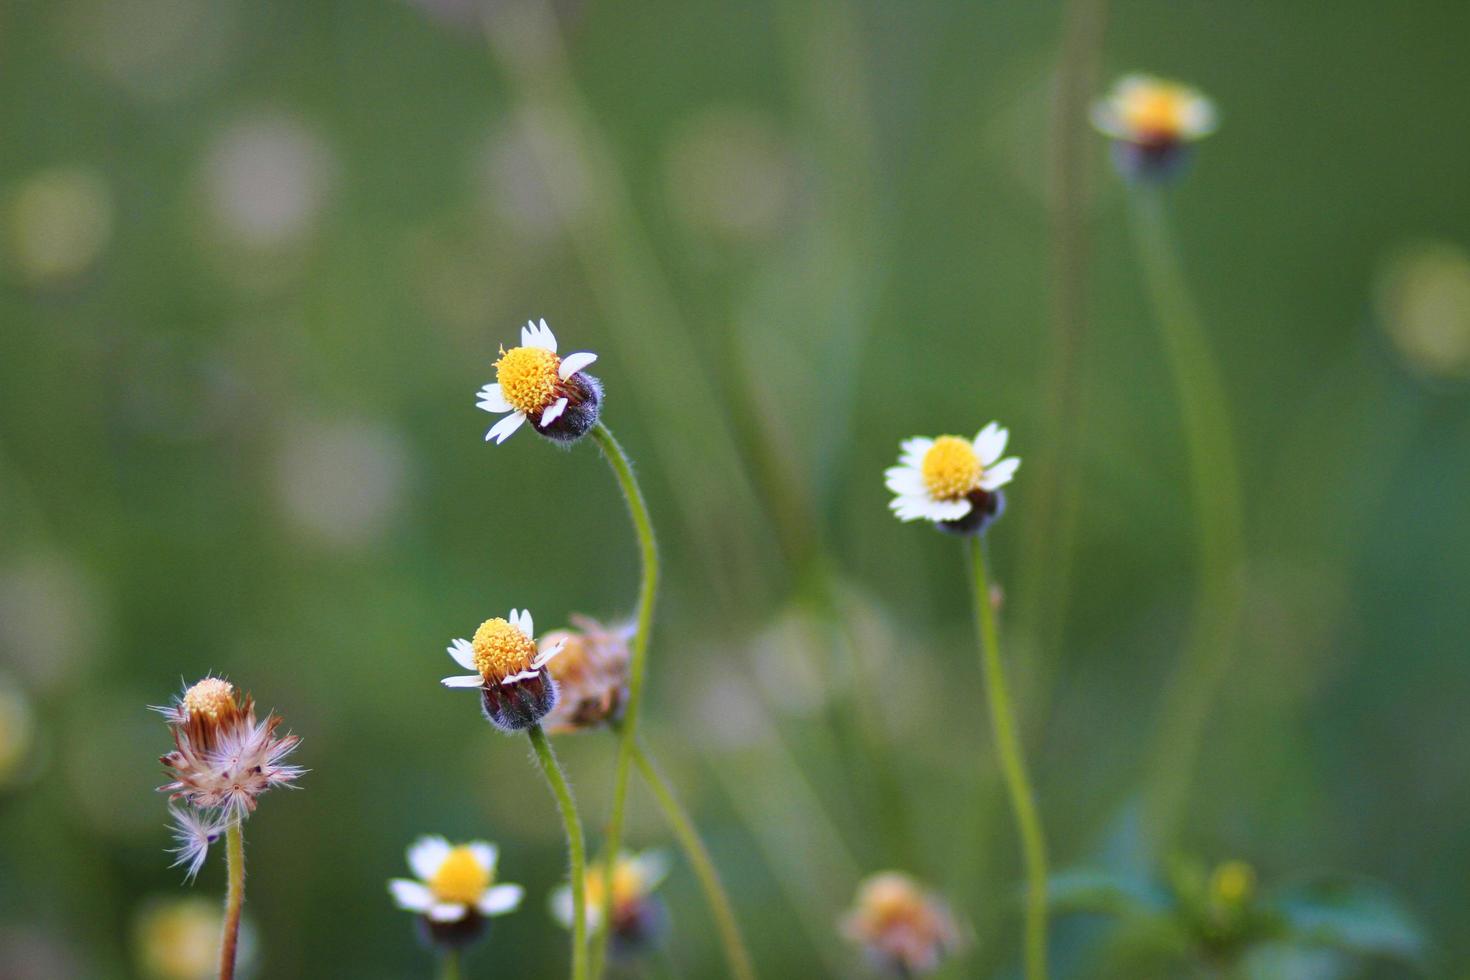 Beautiful wild Camomile grass flowers in the meadow with natural sunlight. photo